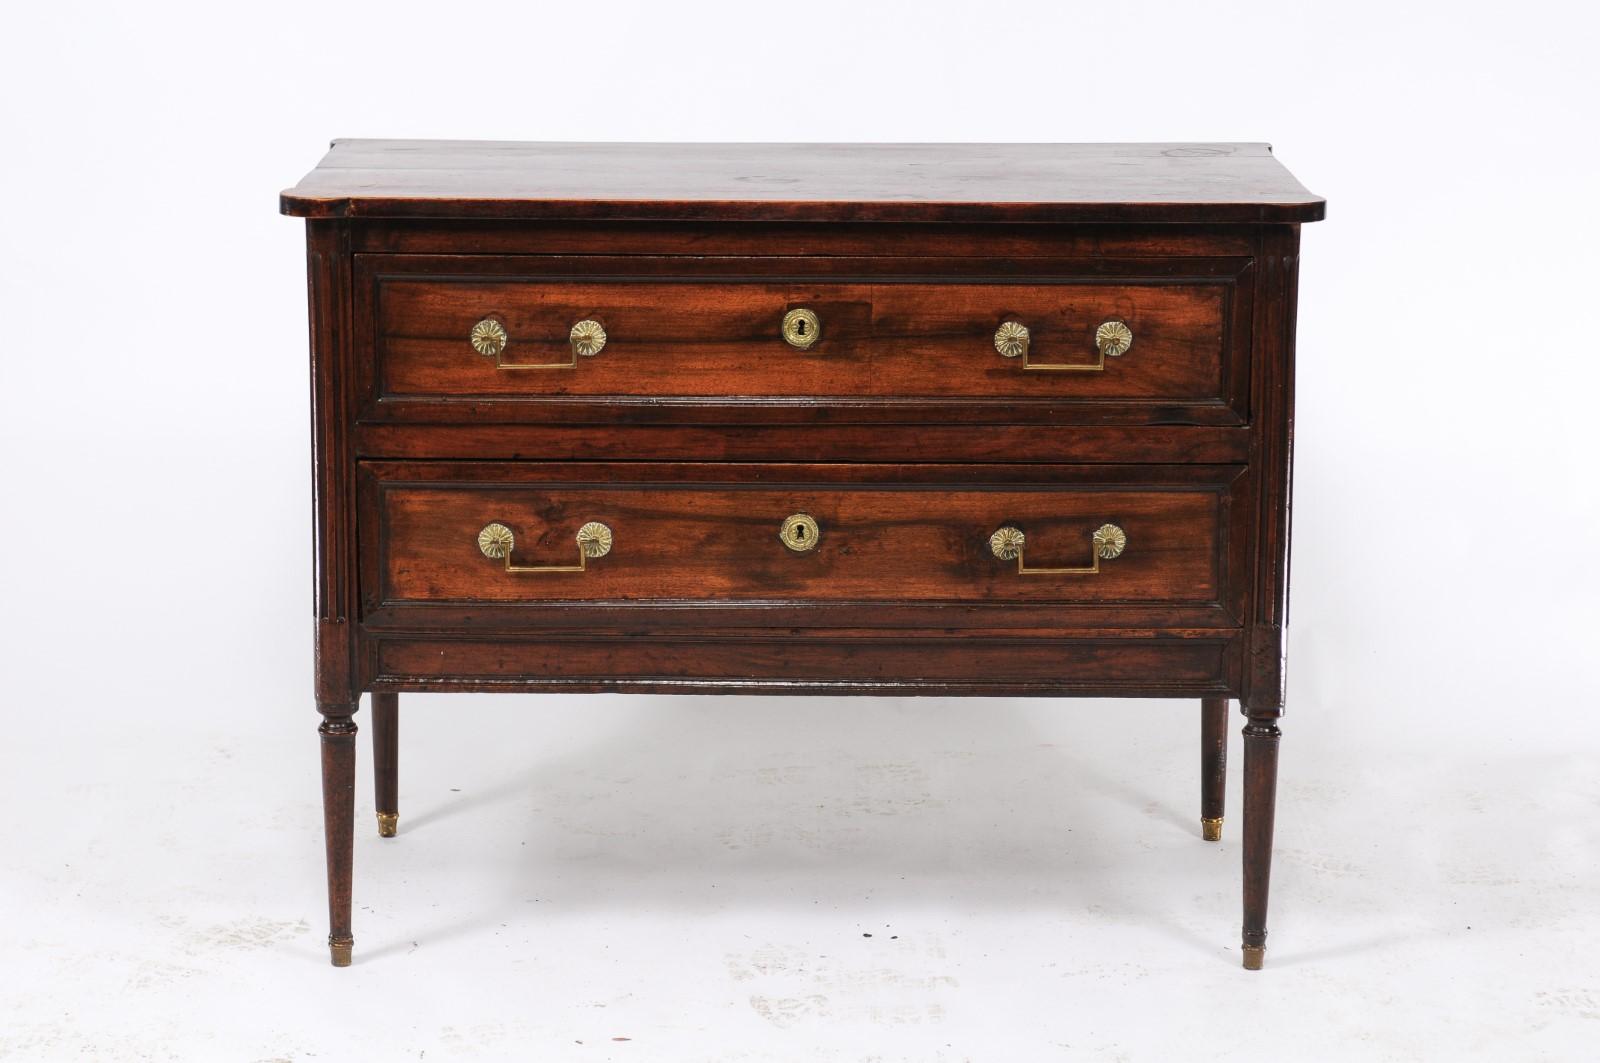 A southwestern French Louis XVI style walnut commode from the second half of the 19th century, with two dovetailed drawers, linear brass hardware, cylindrical tapering legs and fluted side posts. Its elegant and clean lines, classic hardware, two